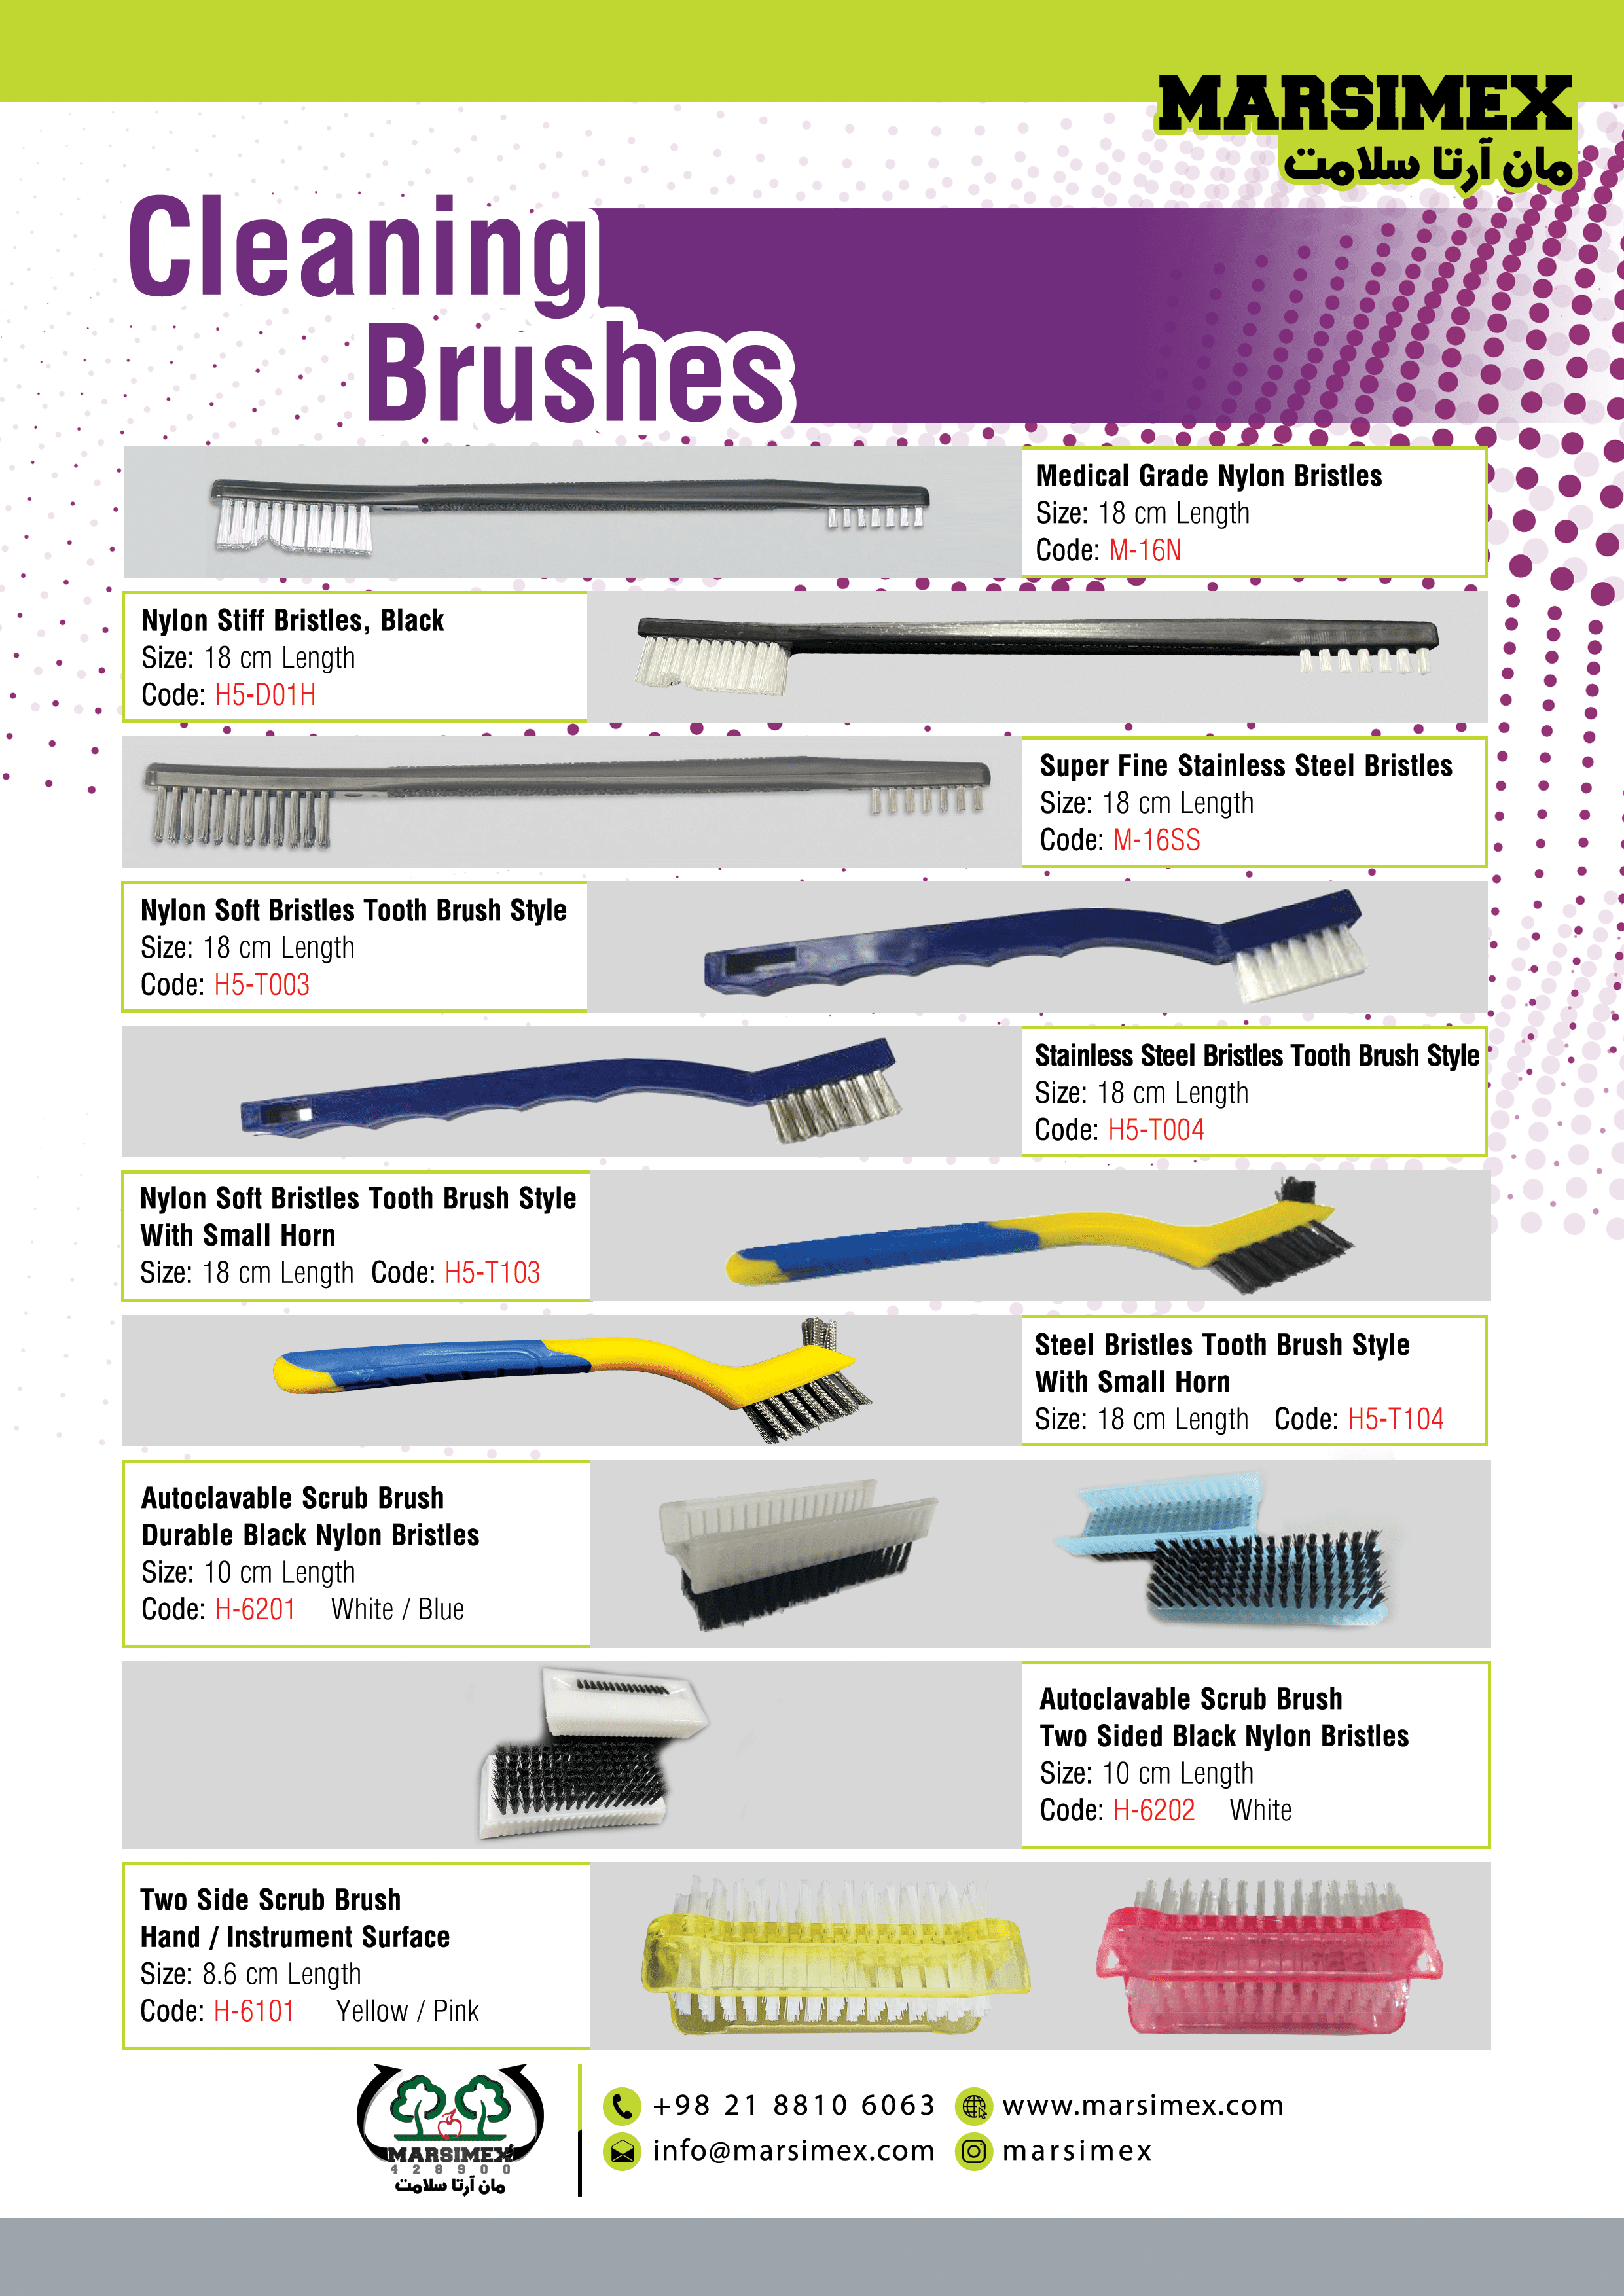 Cleaning Brush Final 2022-1